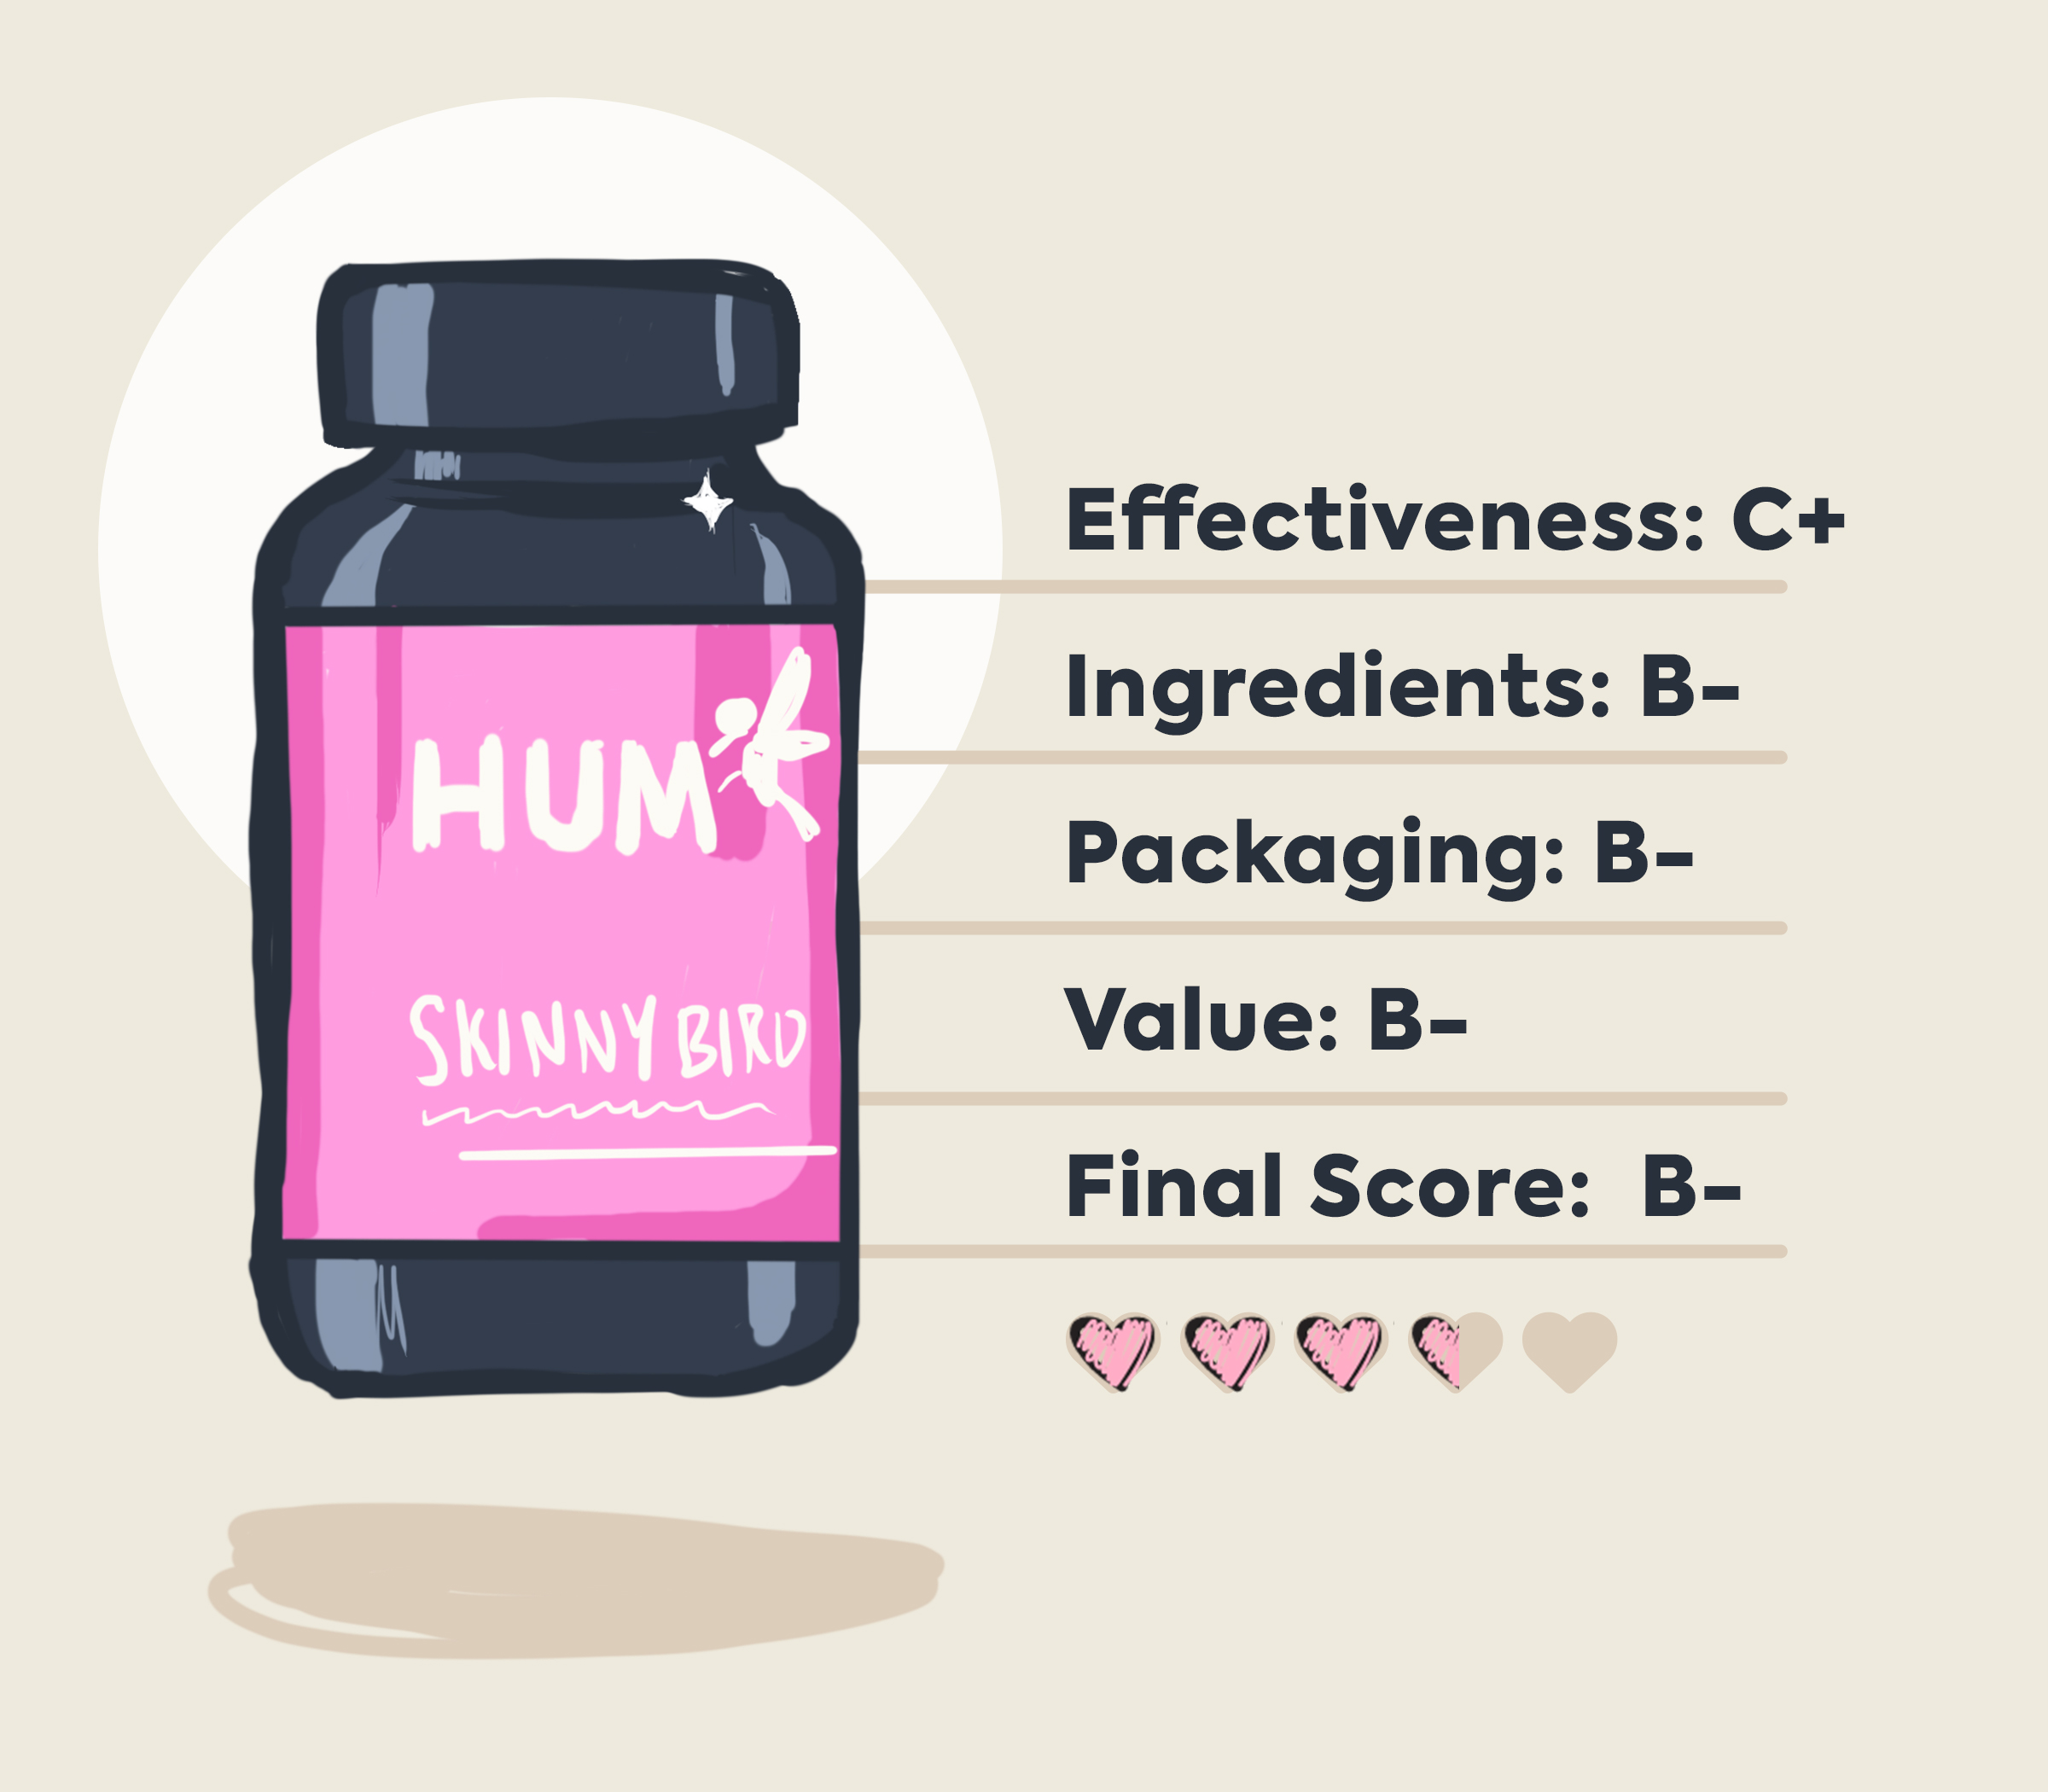 cartoon infographic of hum skinny bird product, with review information.